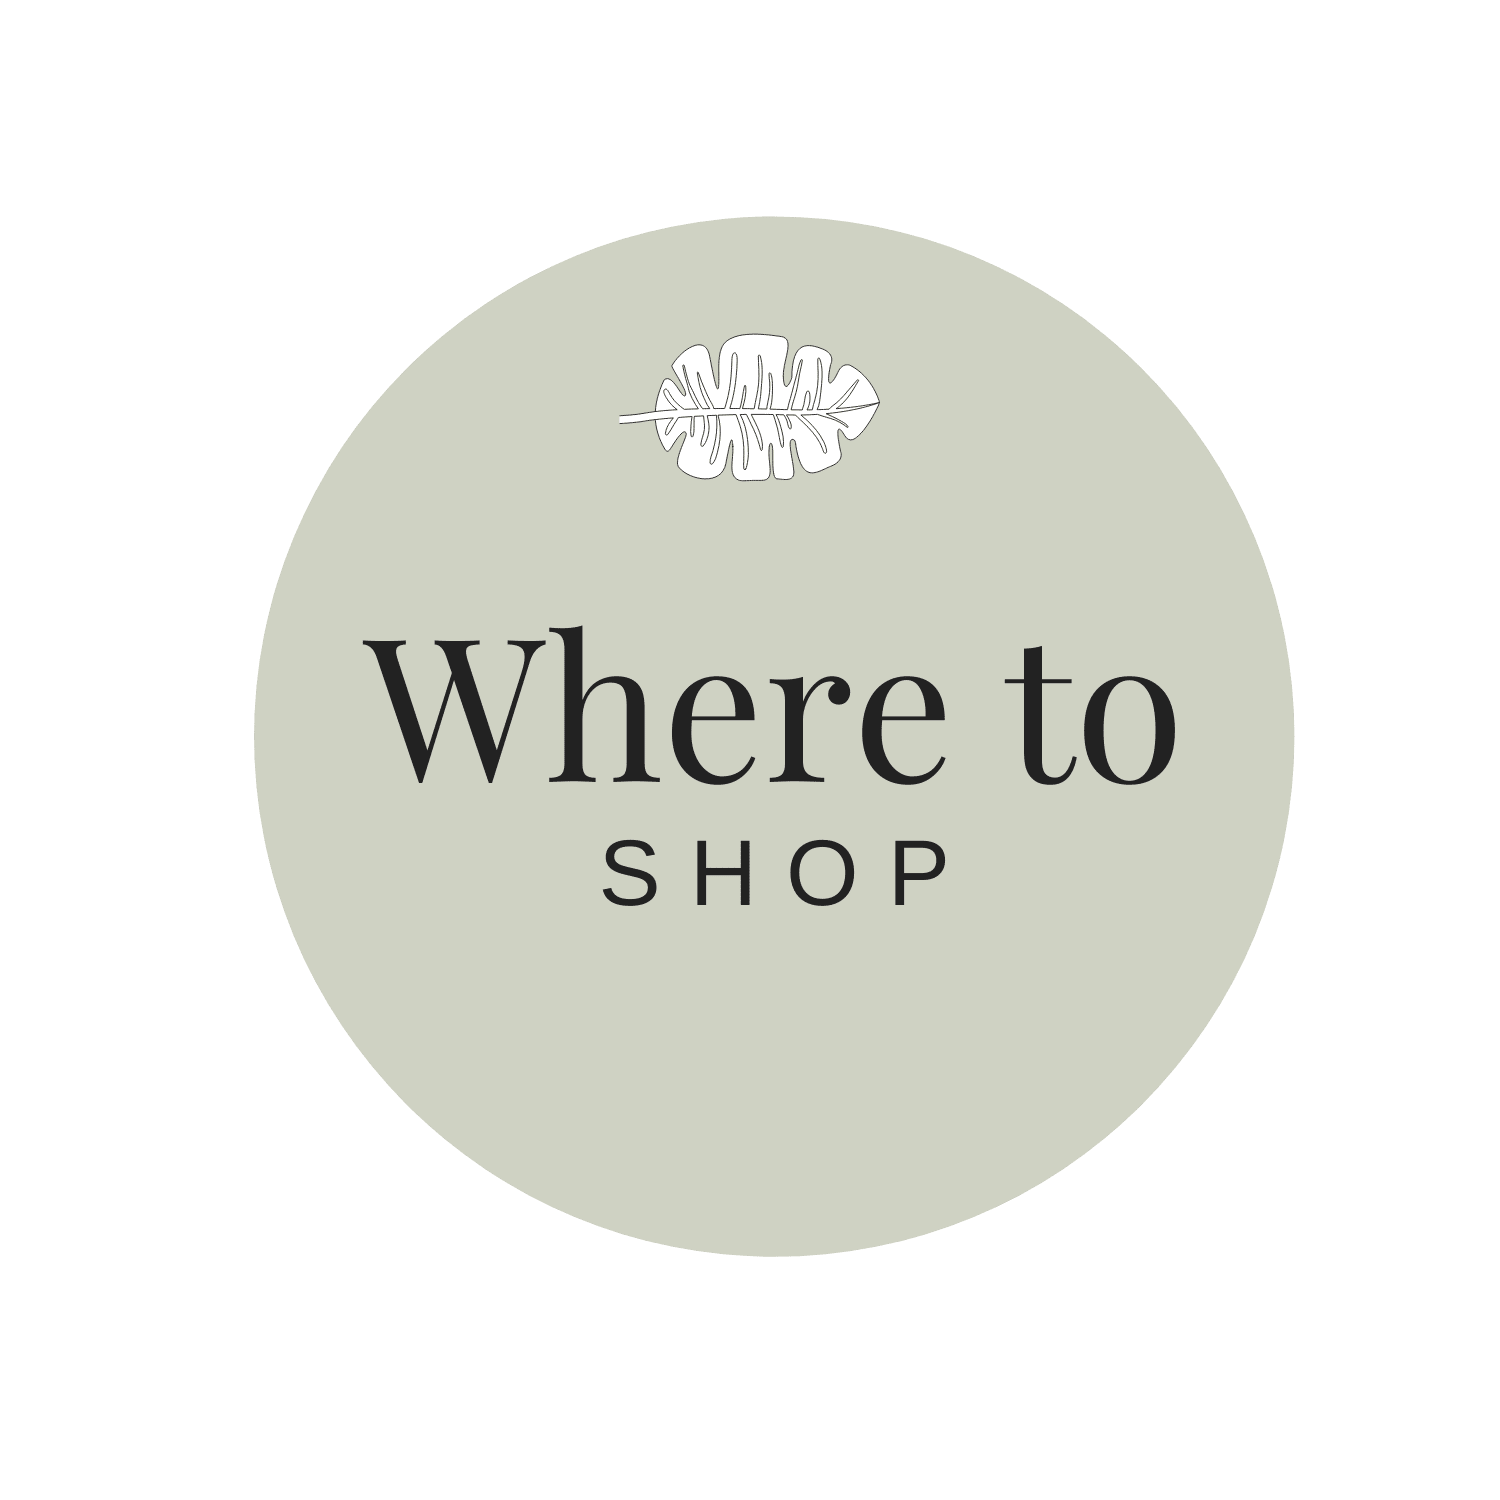 Where to Shop